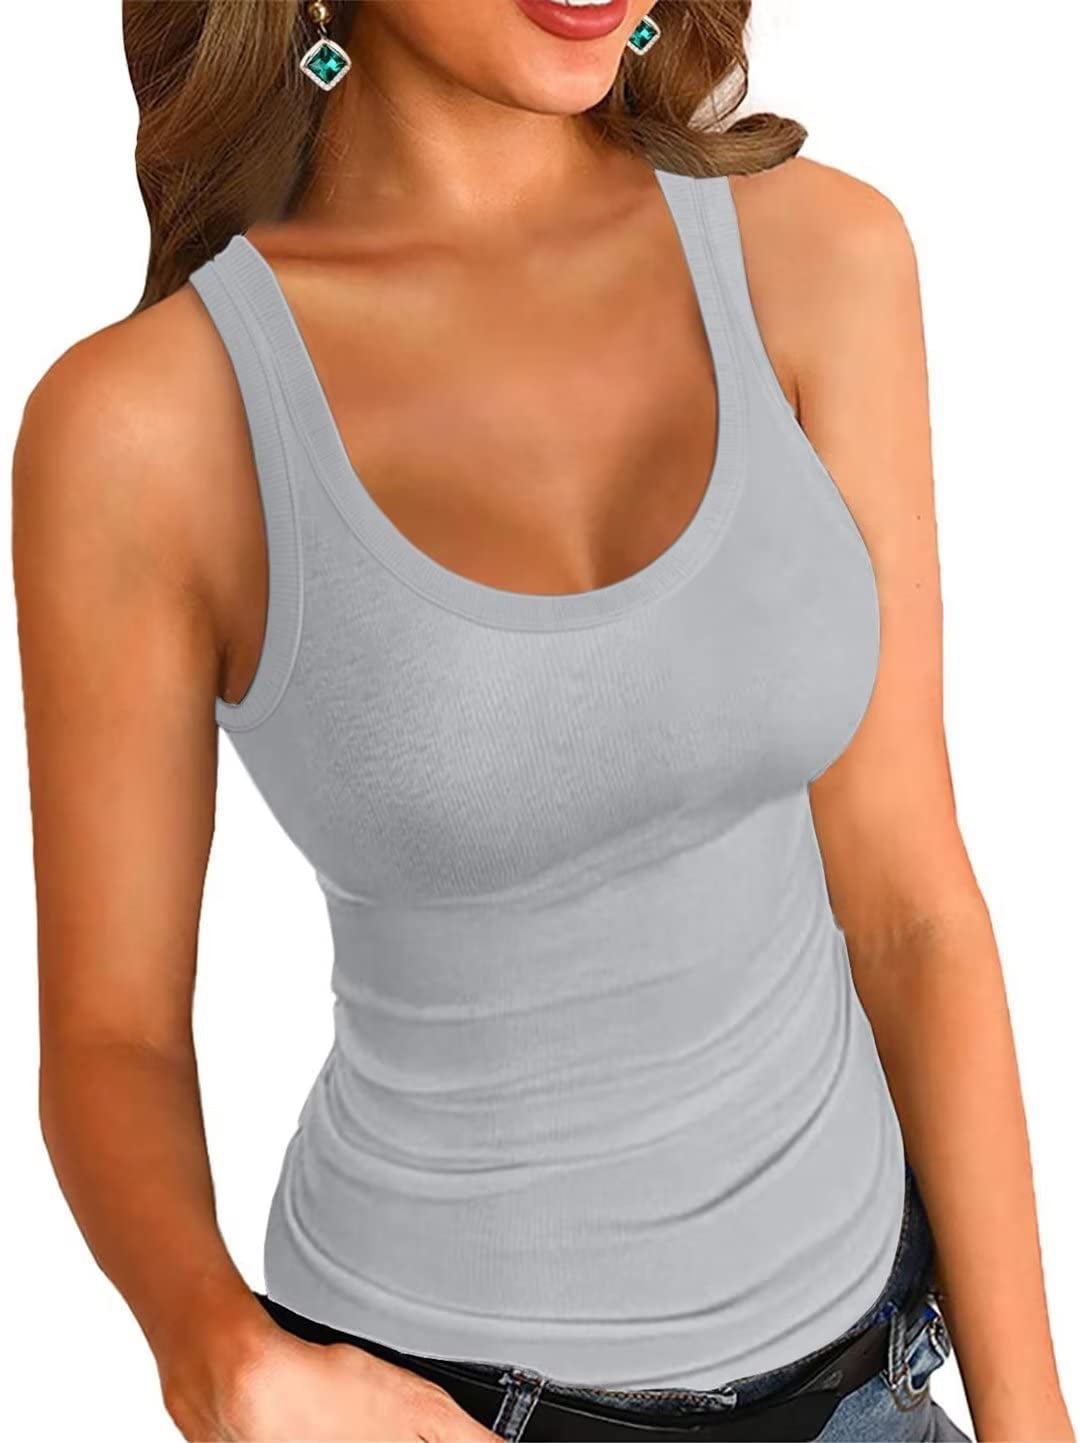 Vafful Women's Sleeveless Tank Top Fitting Scoop Neck Ribbed Knit Basic  Cami Shirts for Women Gray S-XL 